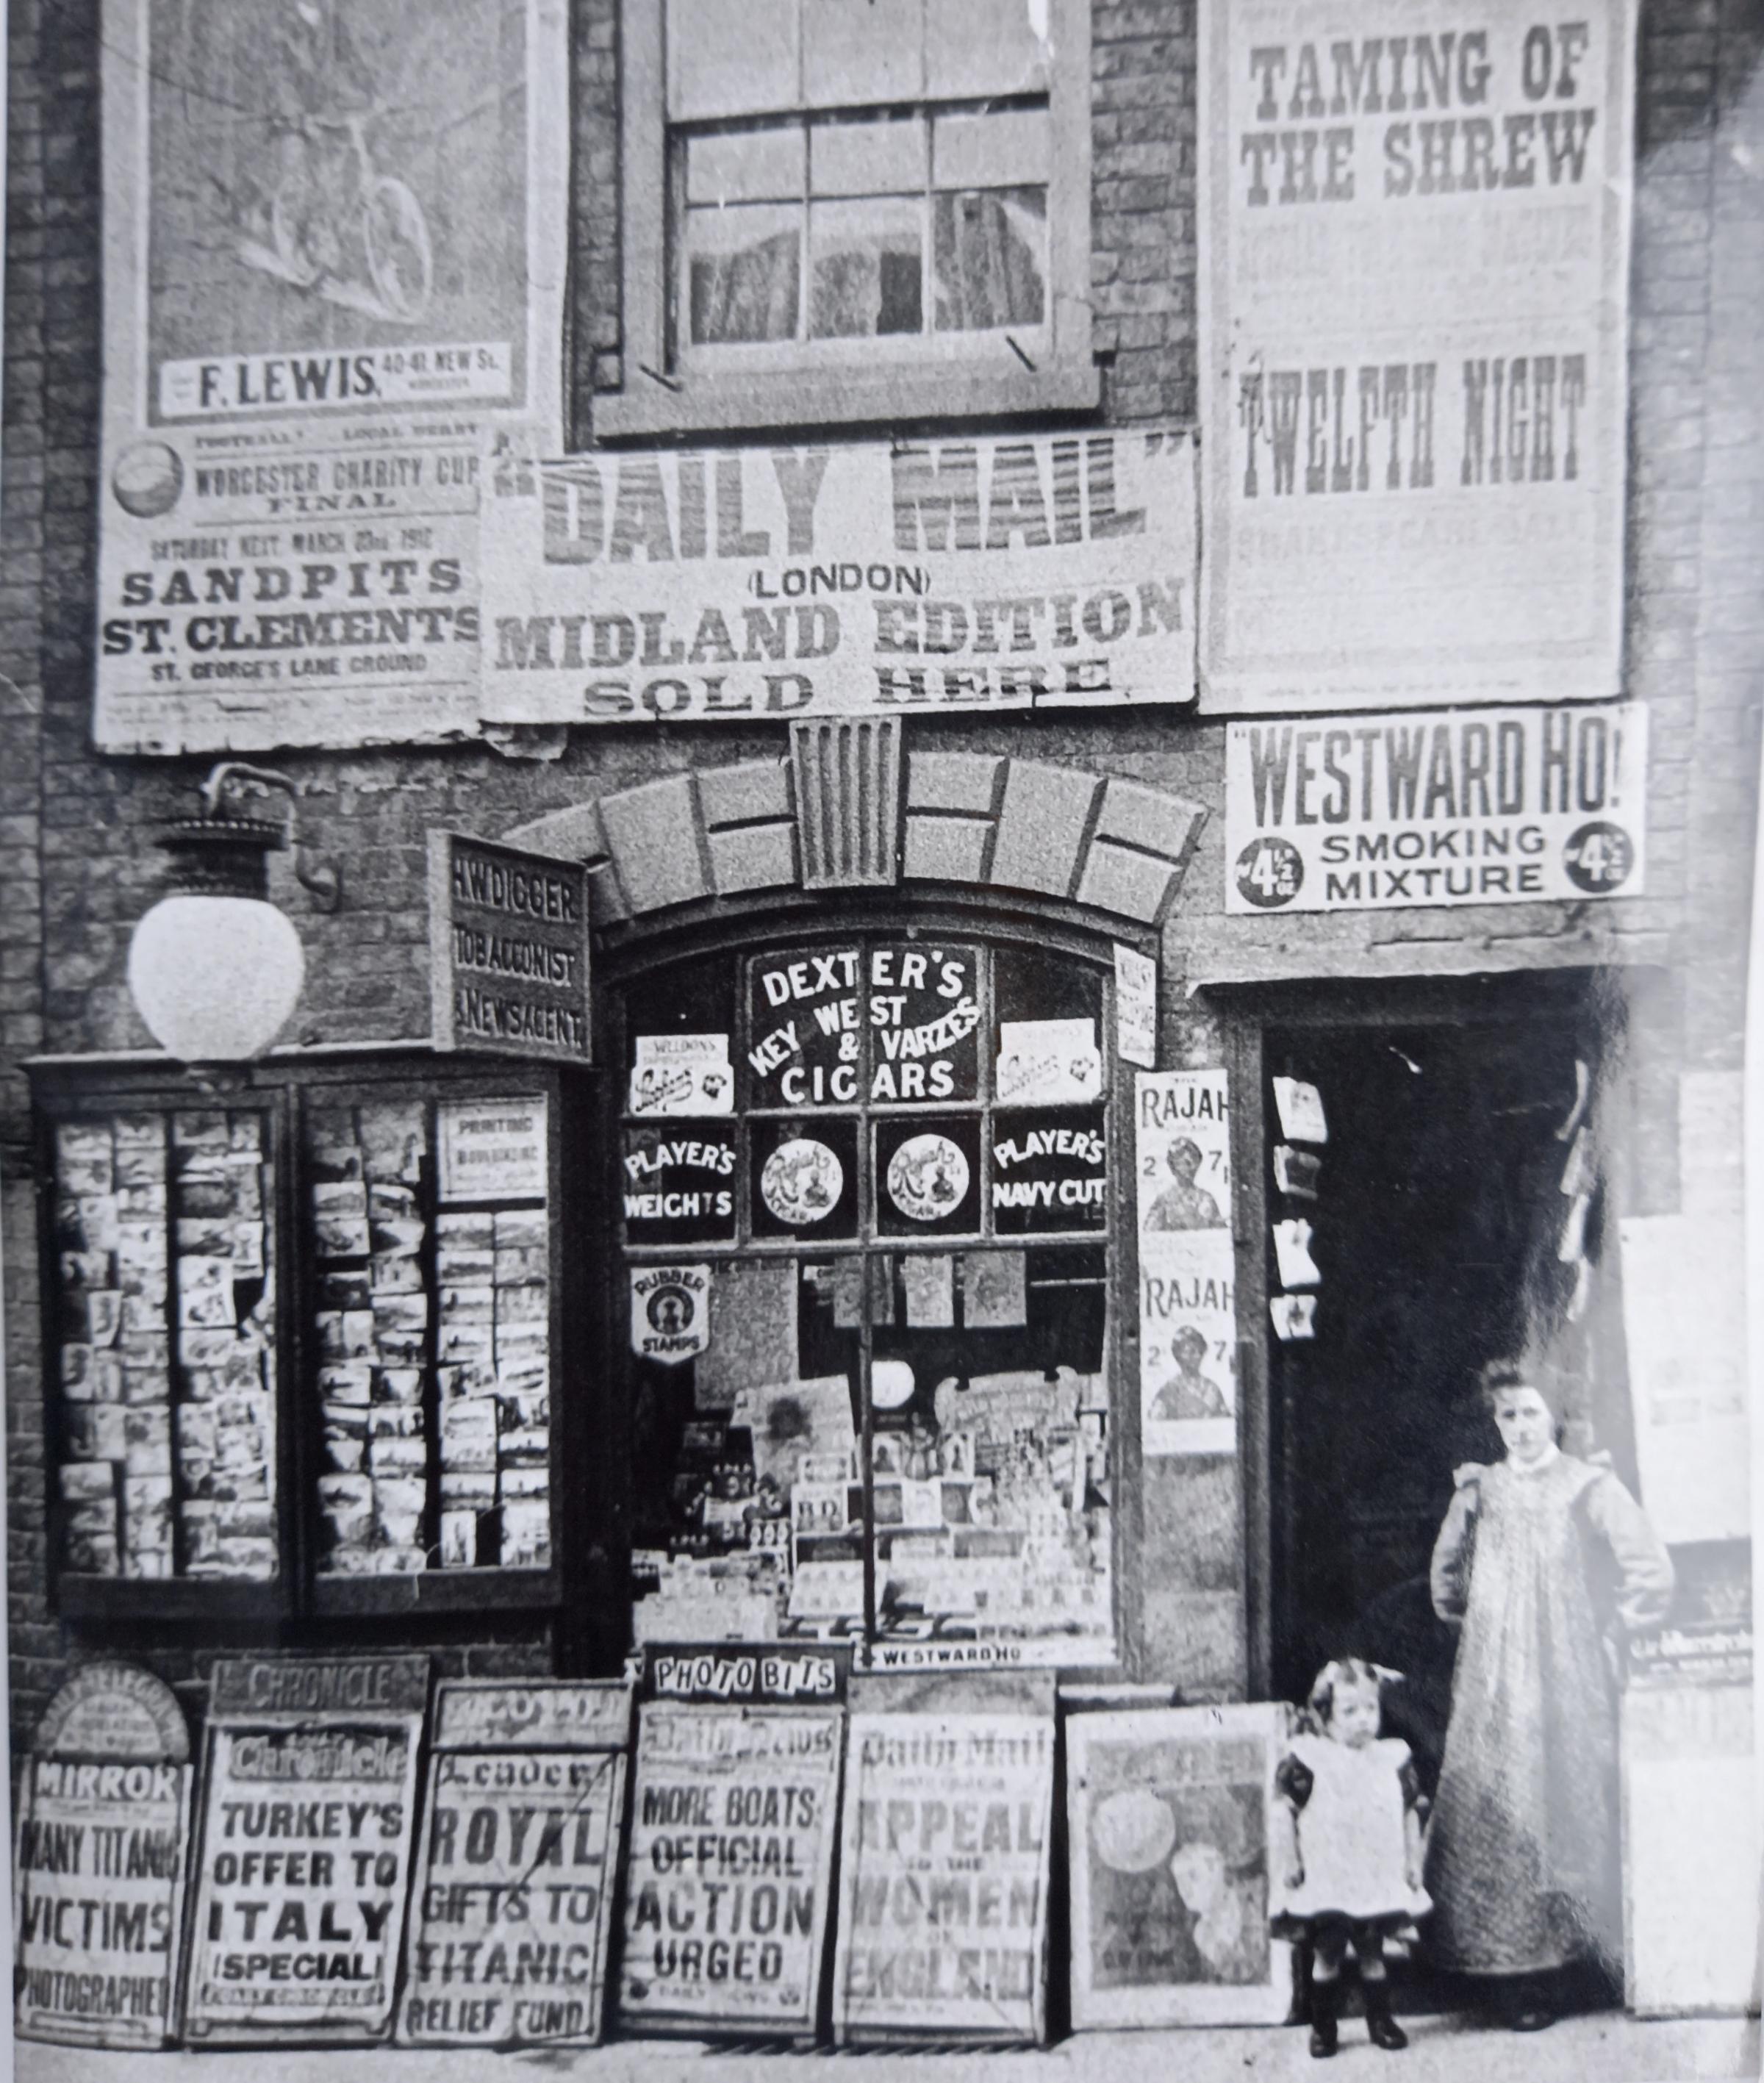 Used before but one of my favourite old photos, a neighbourhood shop in Sidbury in 1912